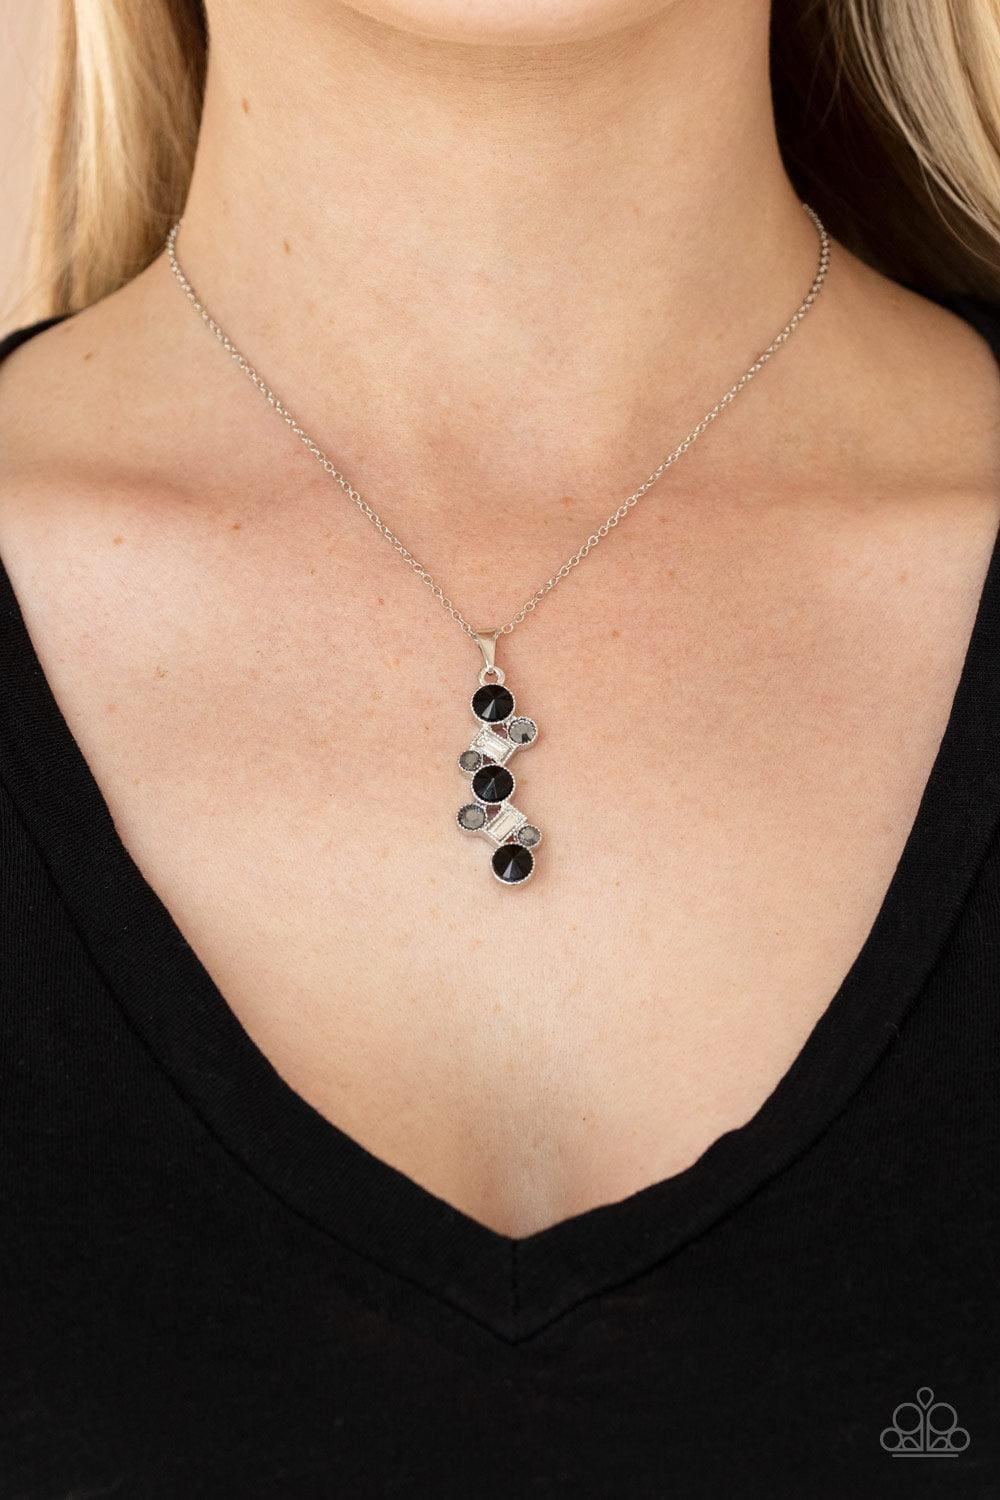 Paparazzi Accessories - Classically Clustered - Black Necklace - Bling by JessieK